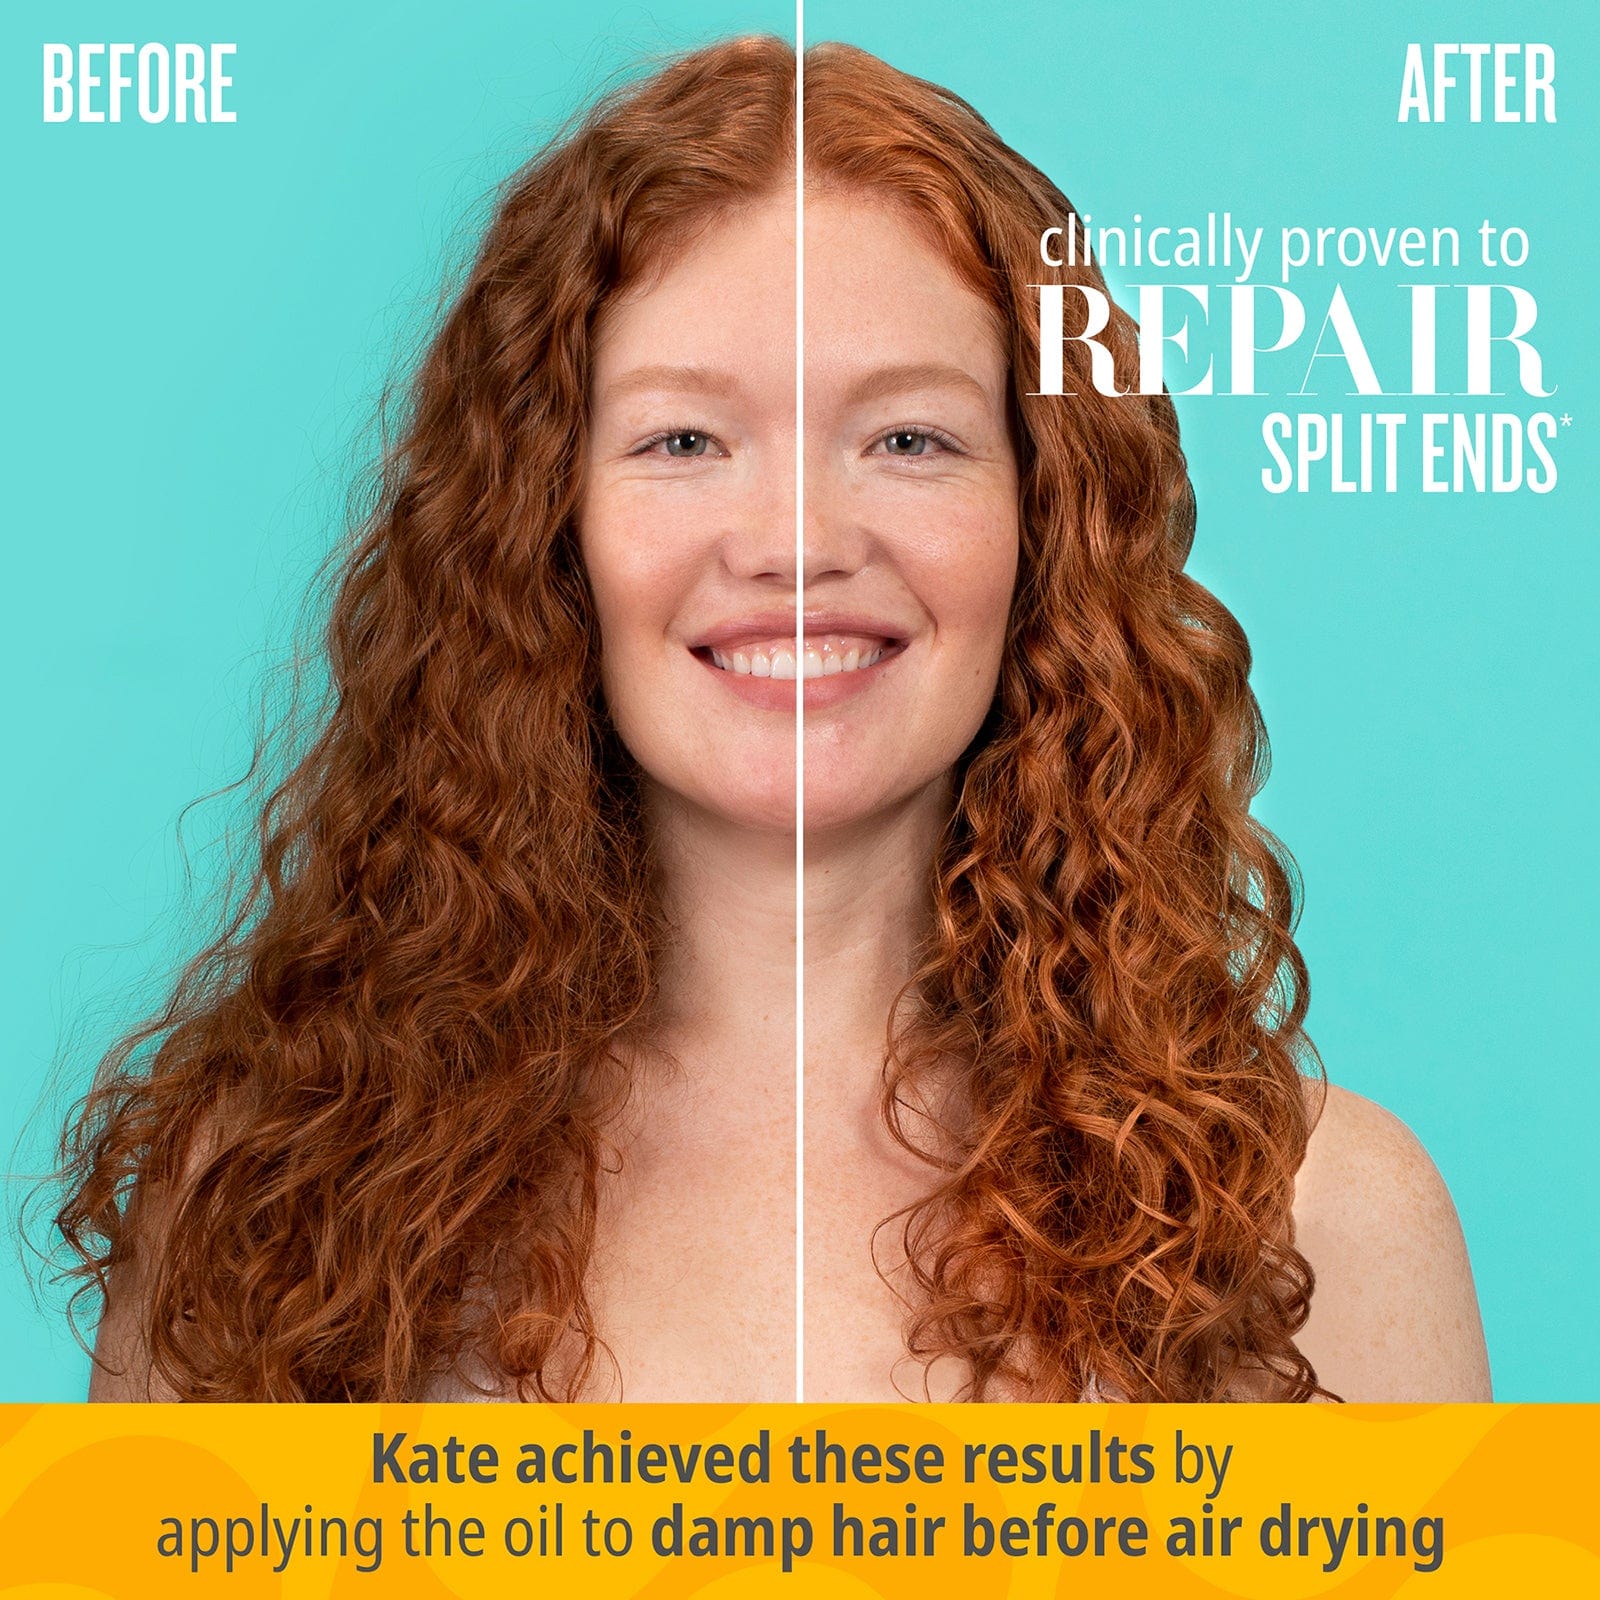 Before | After clinically proven to repair split ends | Kate achieved these results by applying the oil to damp hair before air drying